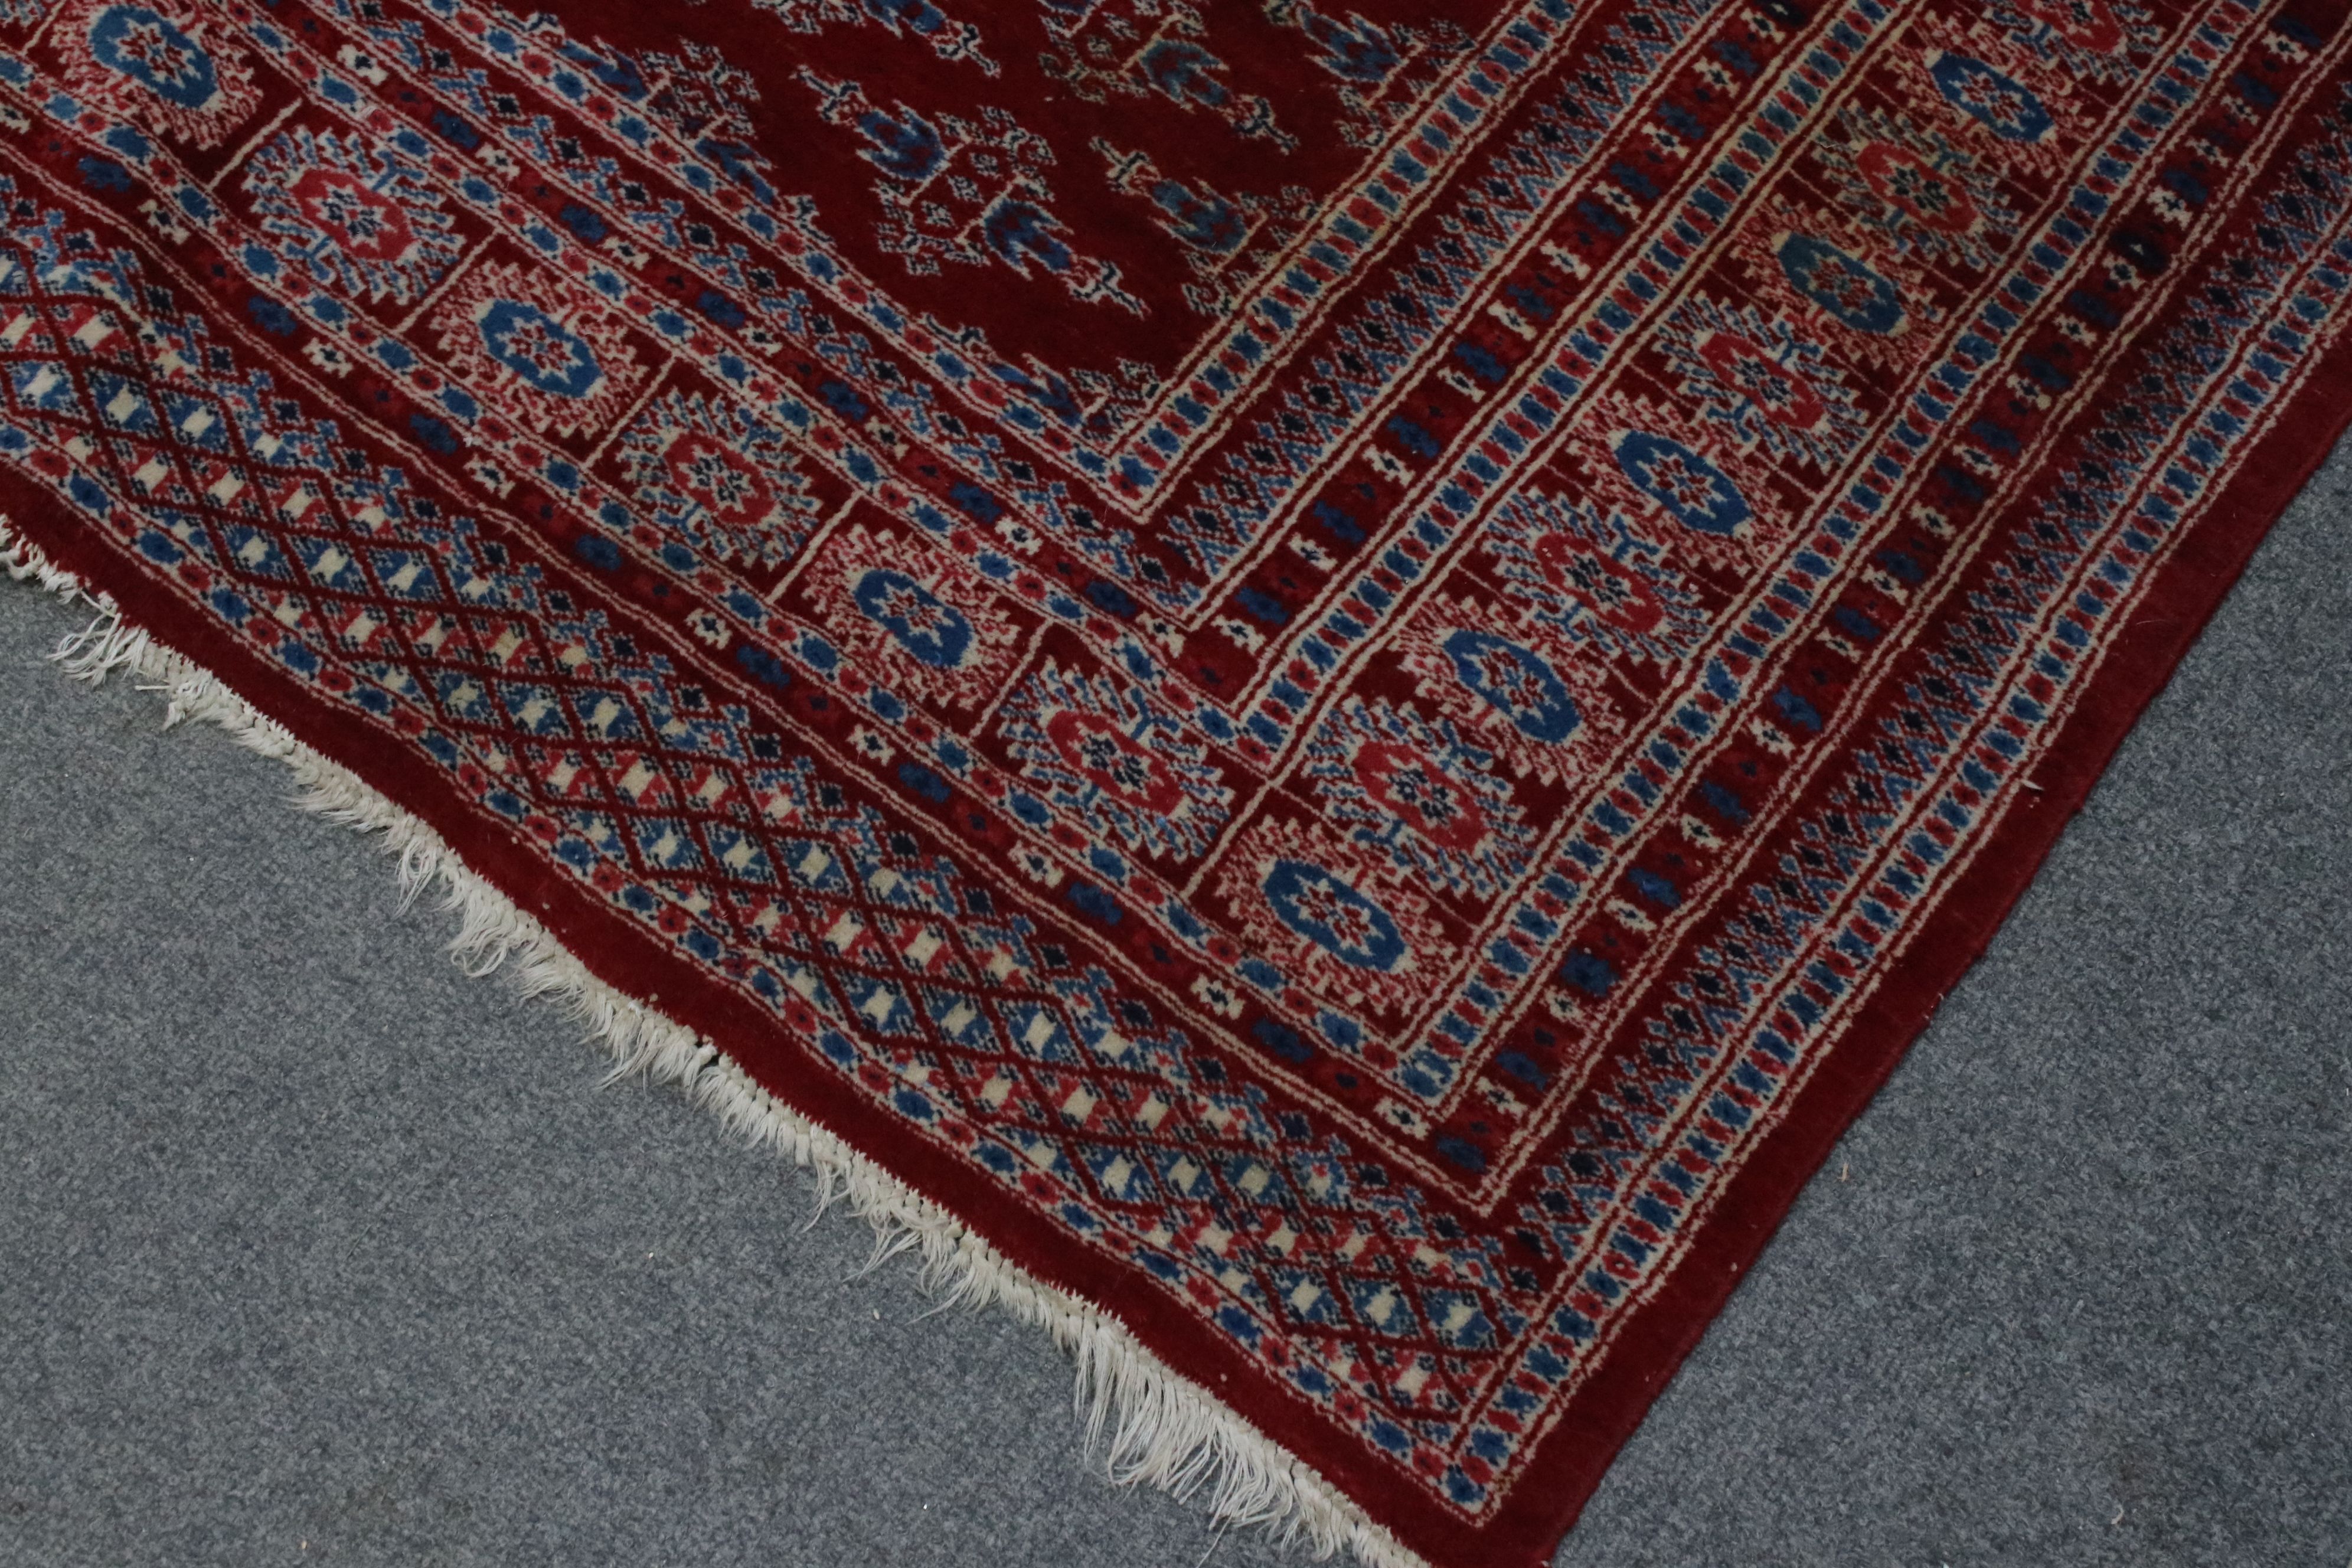 Eastern Red Ground Rug with Geometric pattern with a border, 184cms x 130cms - Image 2 of 4